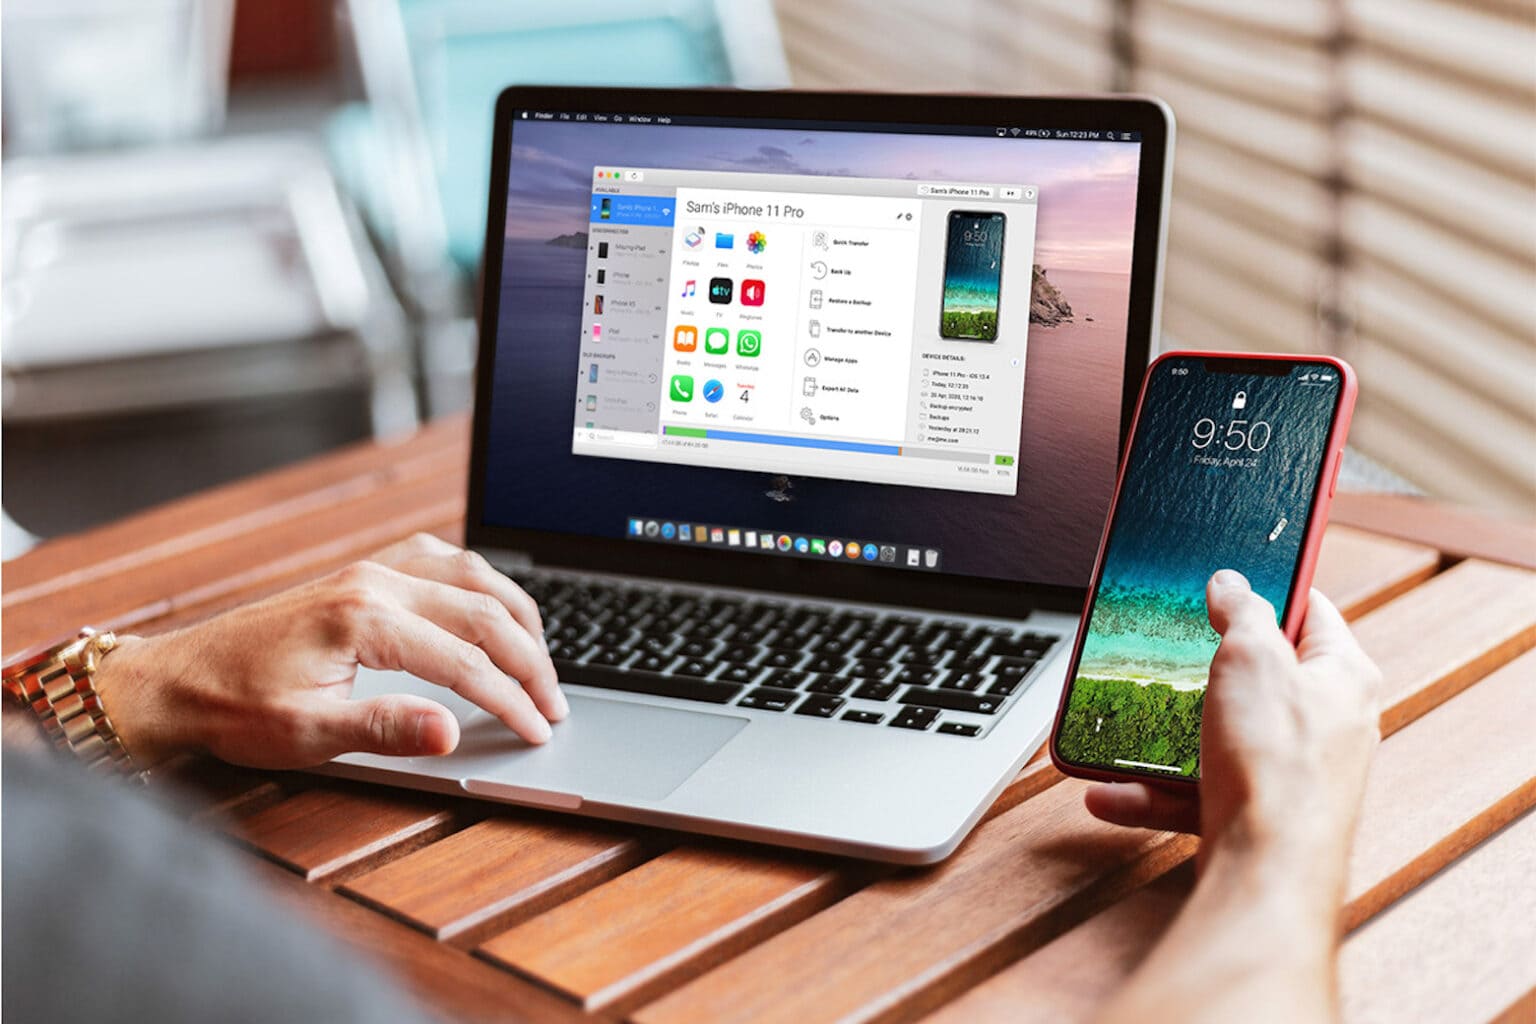 Get 57% off this Apple device manager app loved by users.